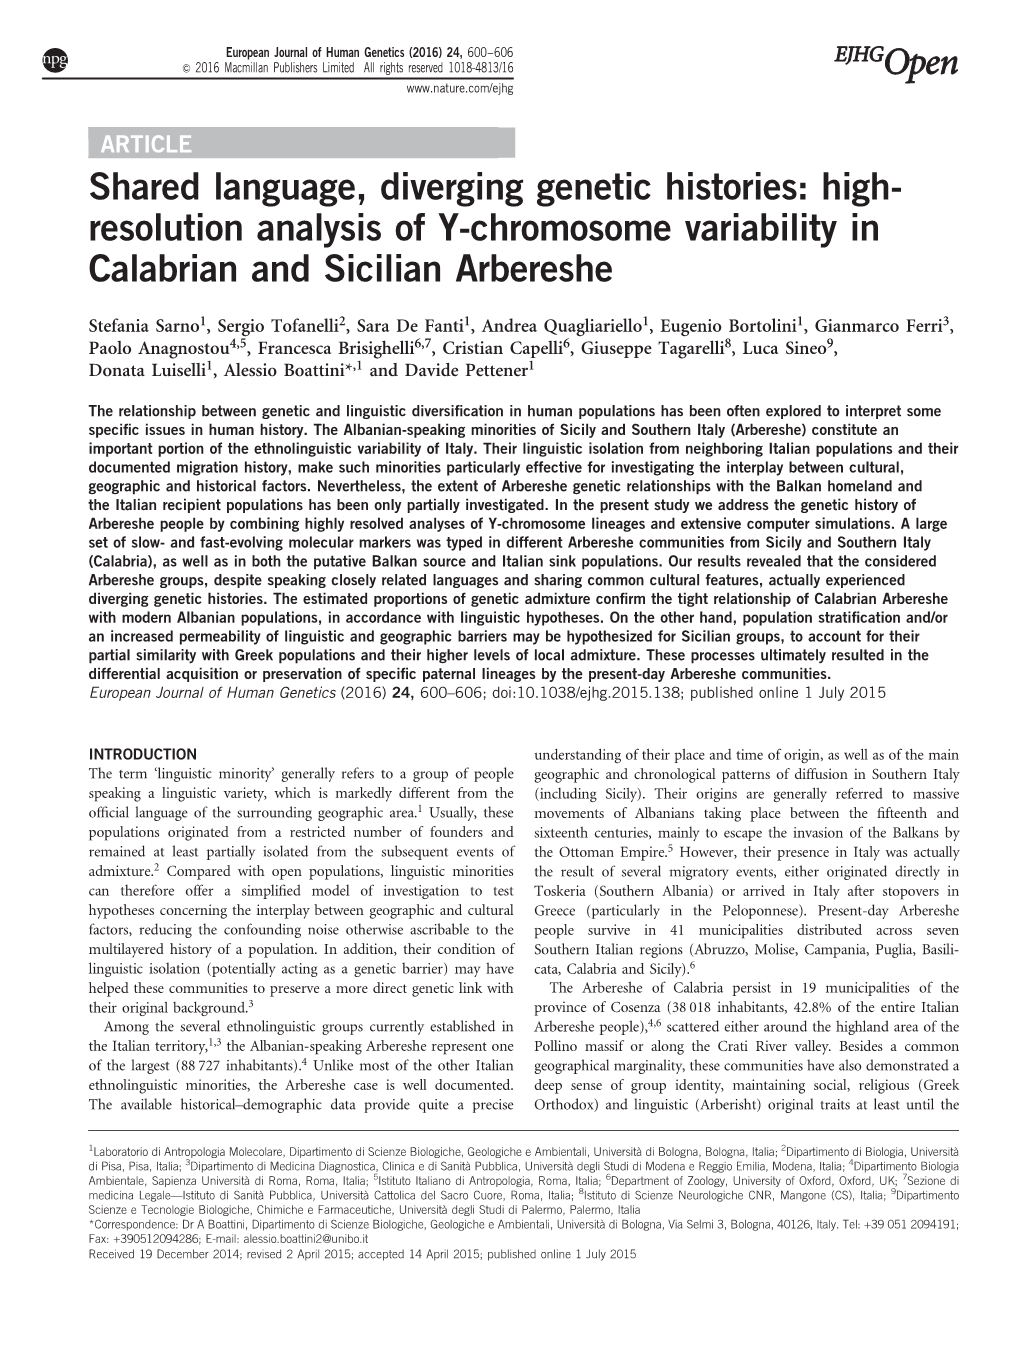 Shared Language, Diverging Genetic Histories: High-Resolution Analysis Of